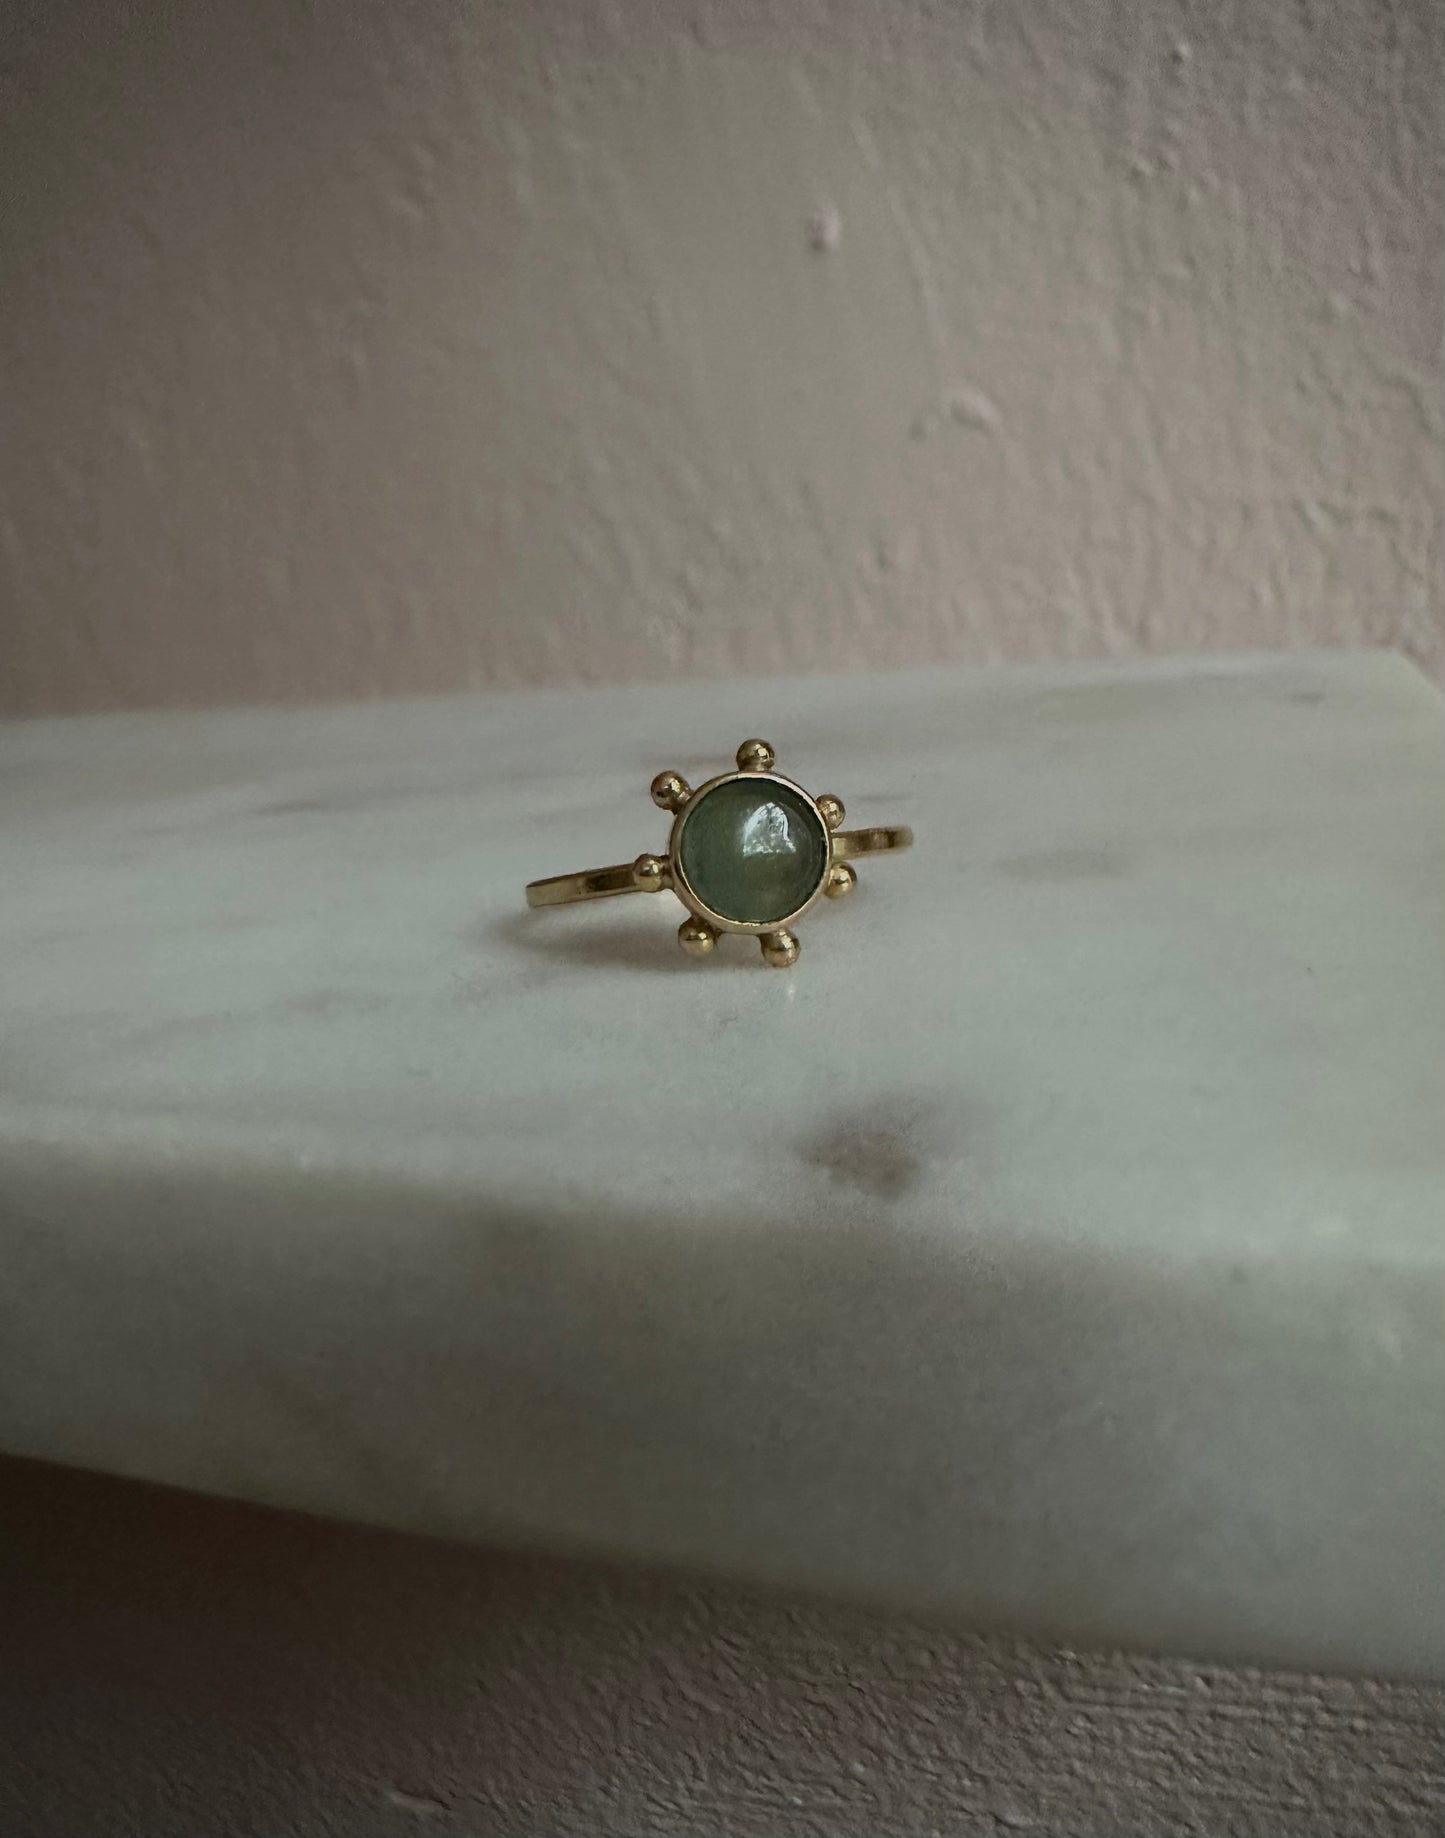 18k solid fairtrade gold ring with aquamarine